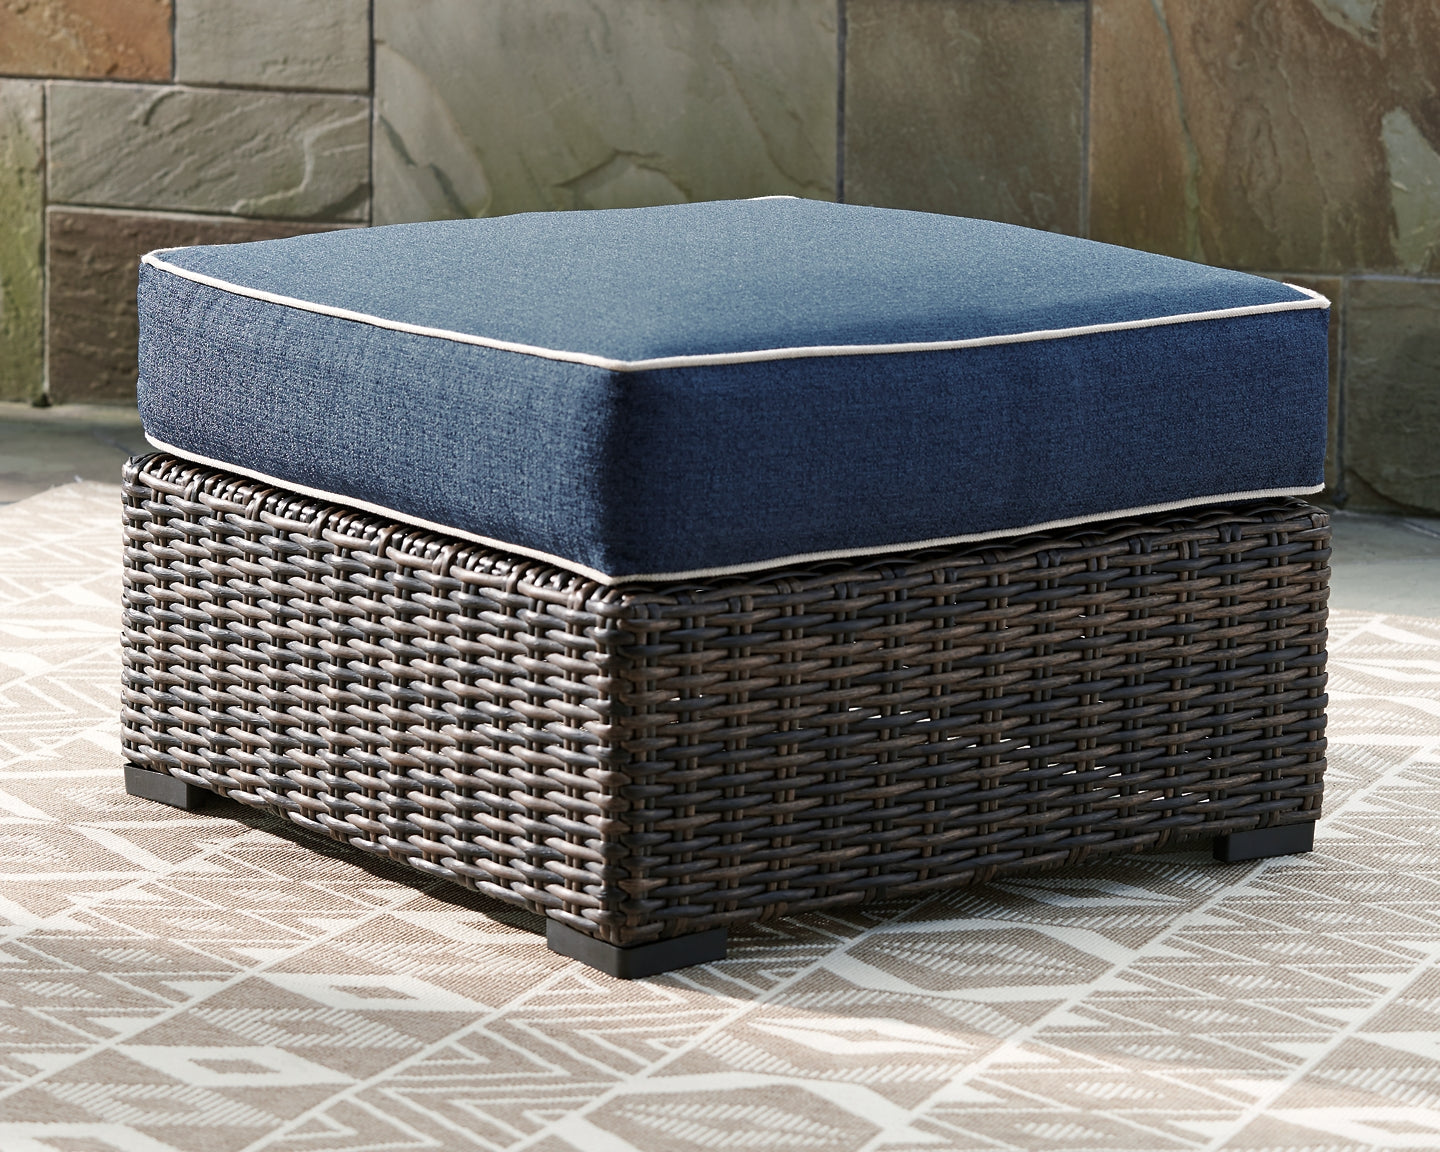 Grasson Lane Ottoman with Cushion at Walker Mattress and Furniture Locations in Cedar Park and Belton TX.